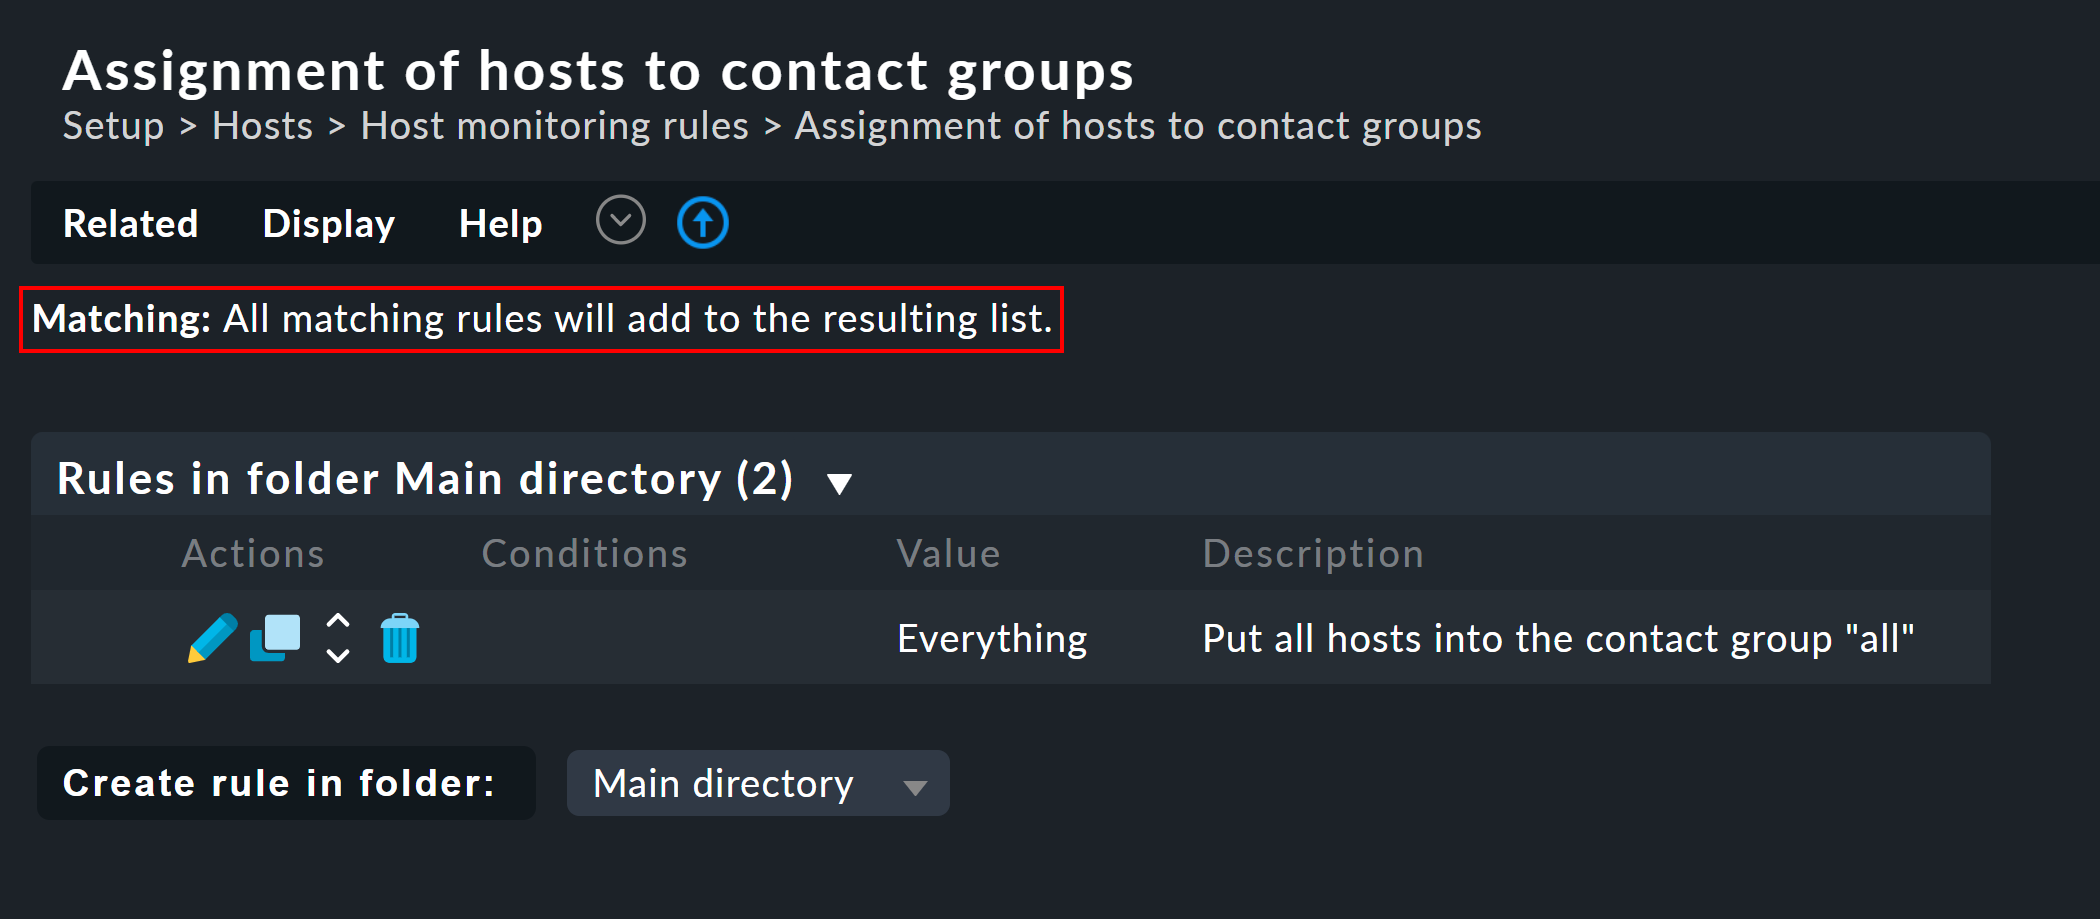 Rule set for assigning hosts to contact groups.